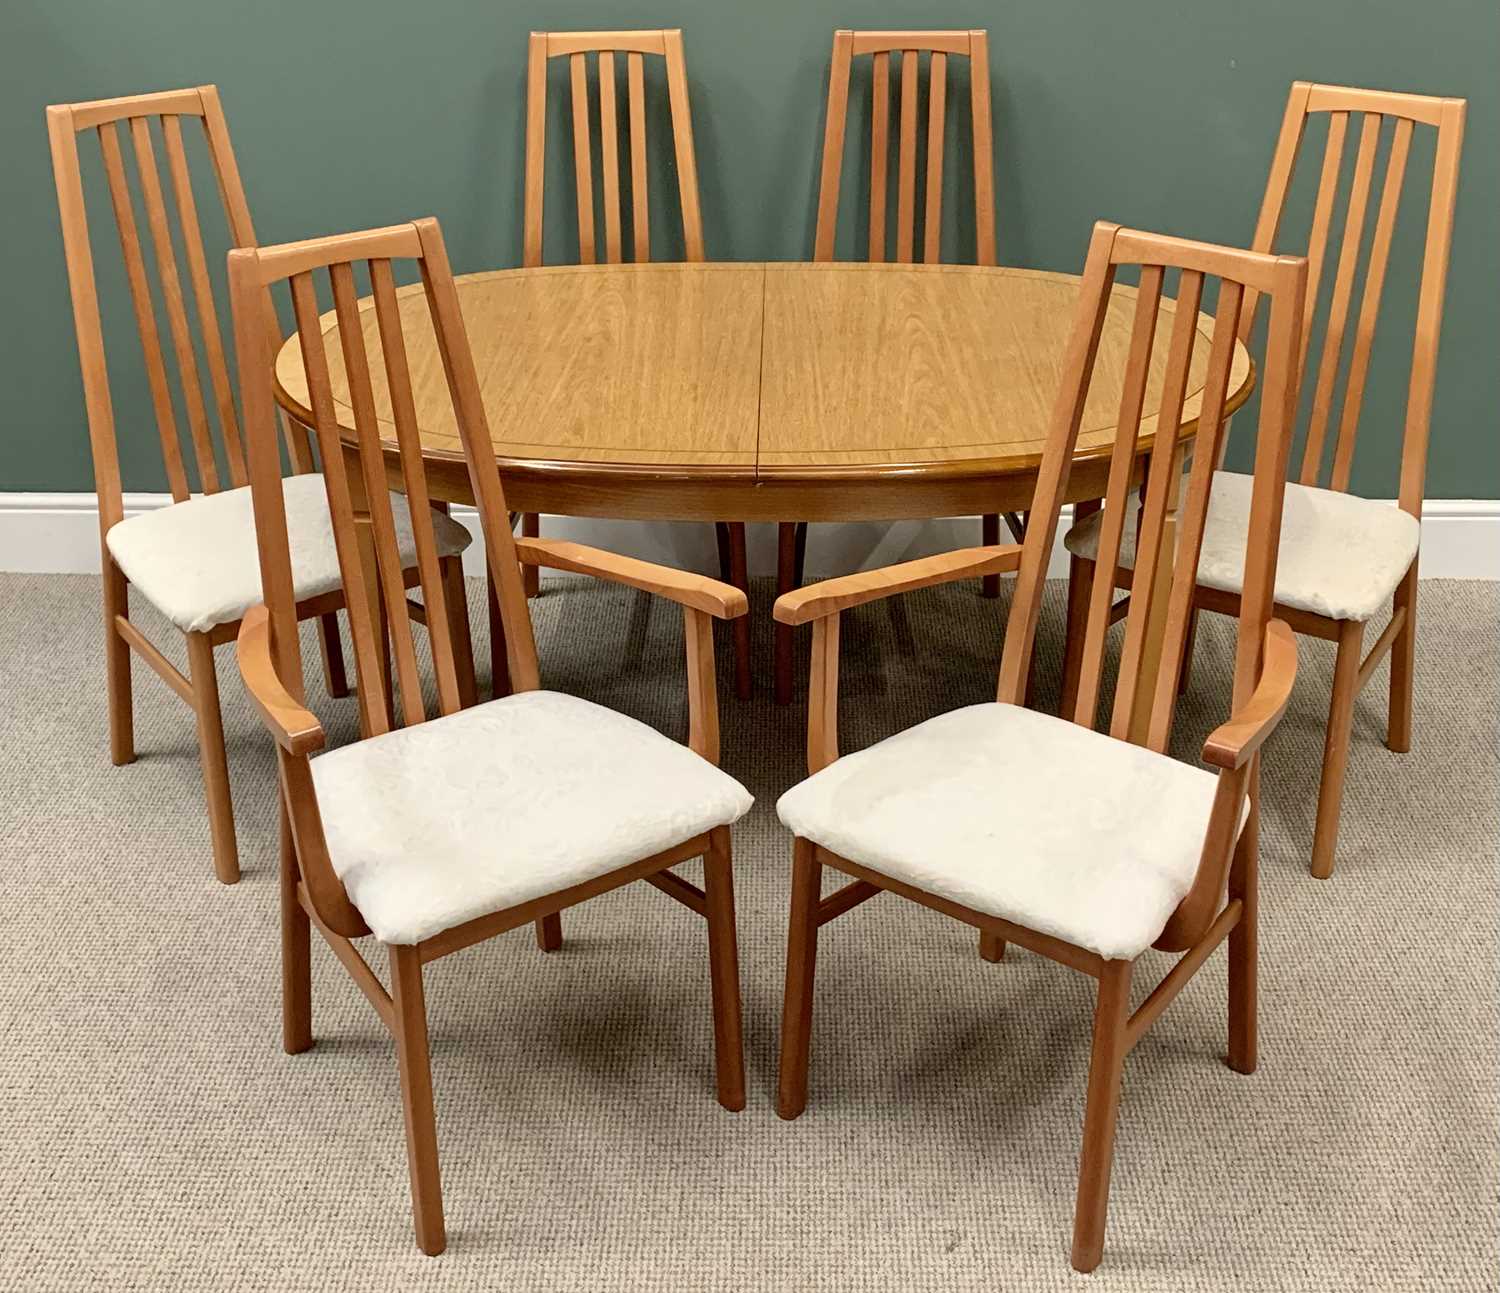 MODERN LIGHT WOOD EXTENDING DINING TABLE, 74cms H, 95cms W, 183cms D and a SET OF SIX SLATTED